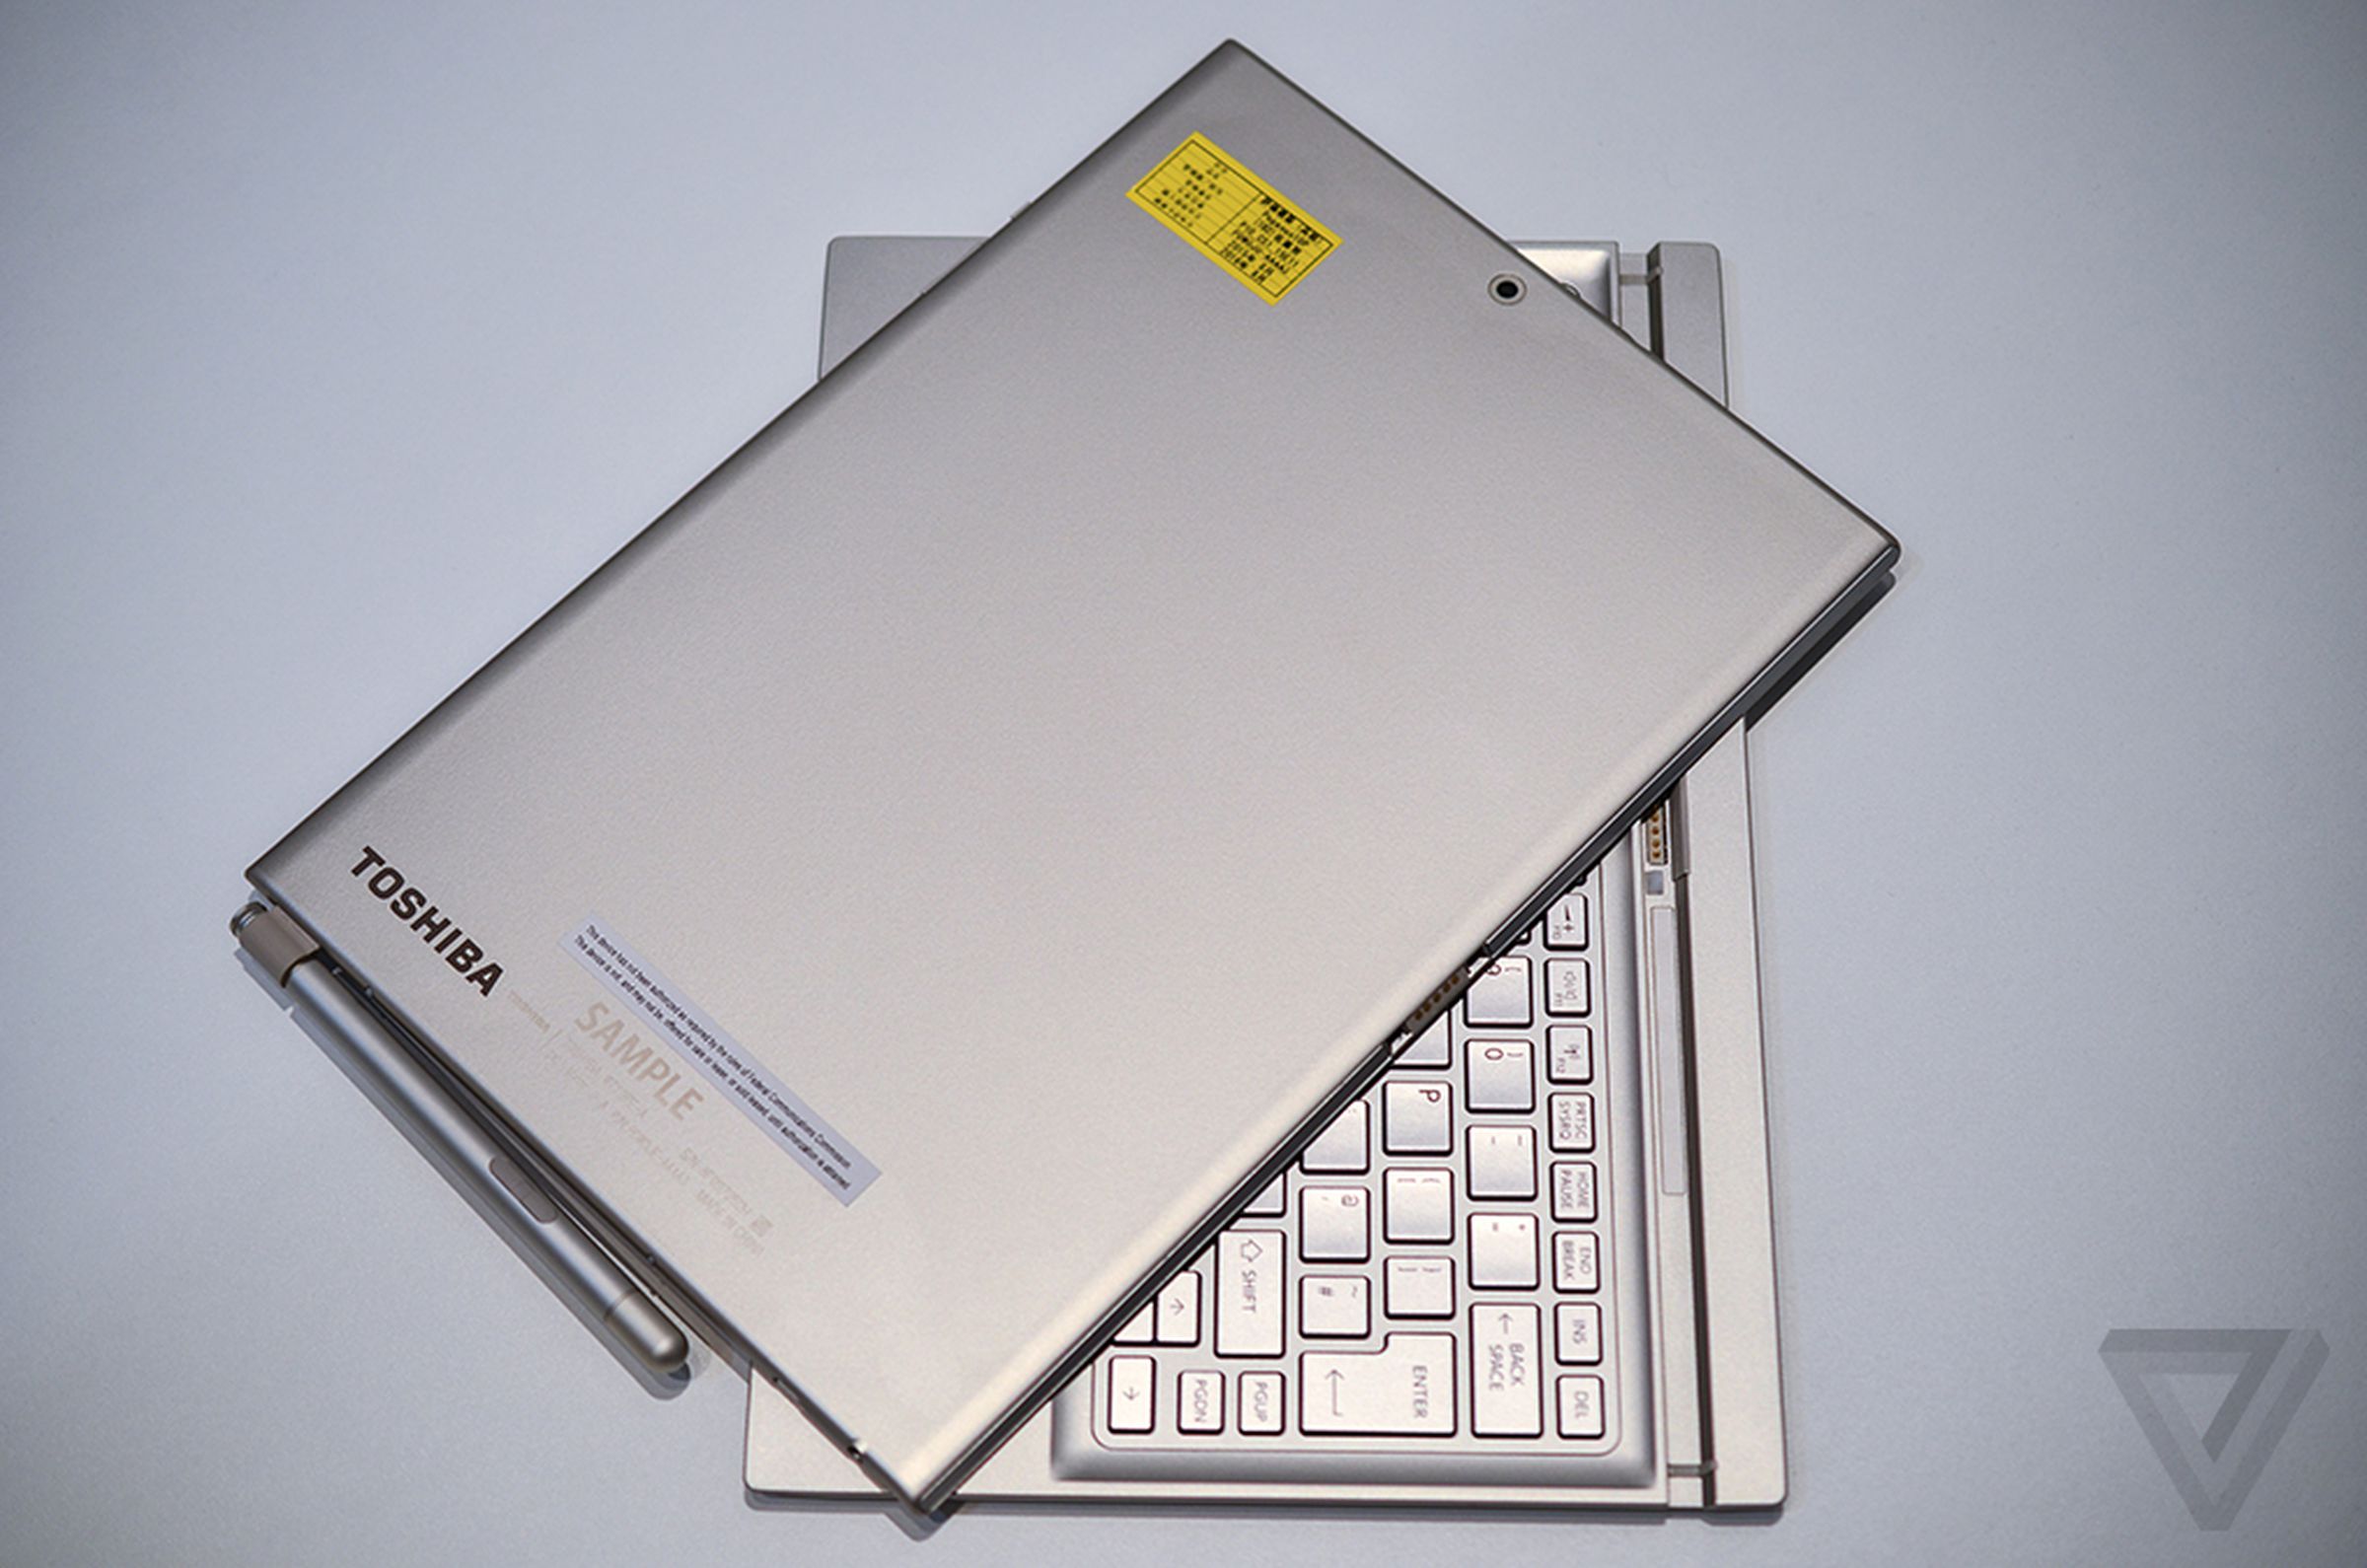 Toshiba concept tablet hands-on photos